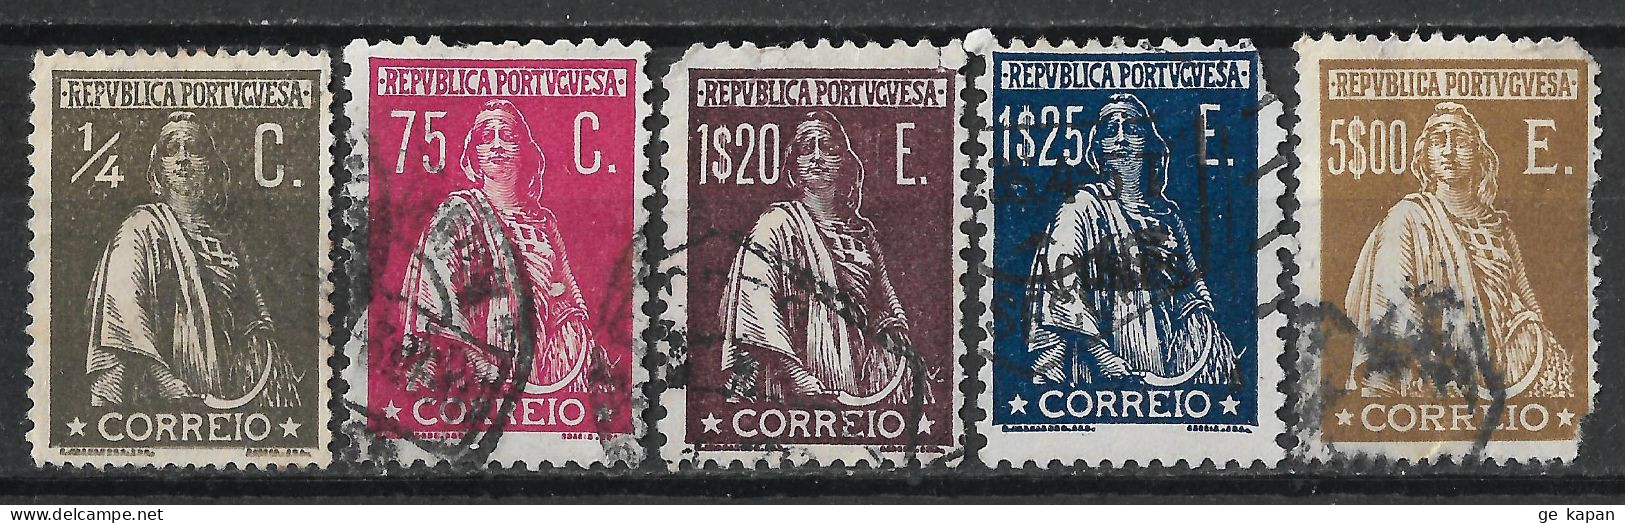 1912-1930 PORTUGAL SET OF 5 USED STAMPS (Michel # 204Ax,428,524,527,528) CV €8.30 - Usati